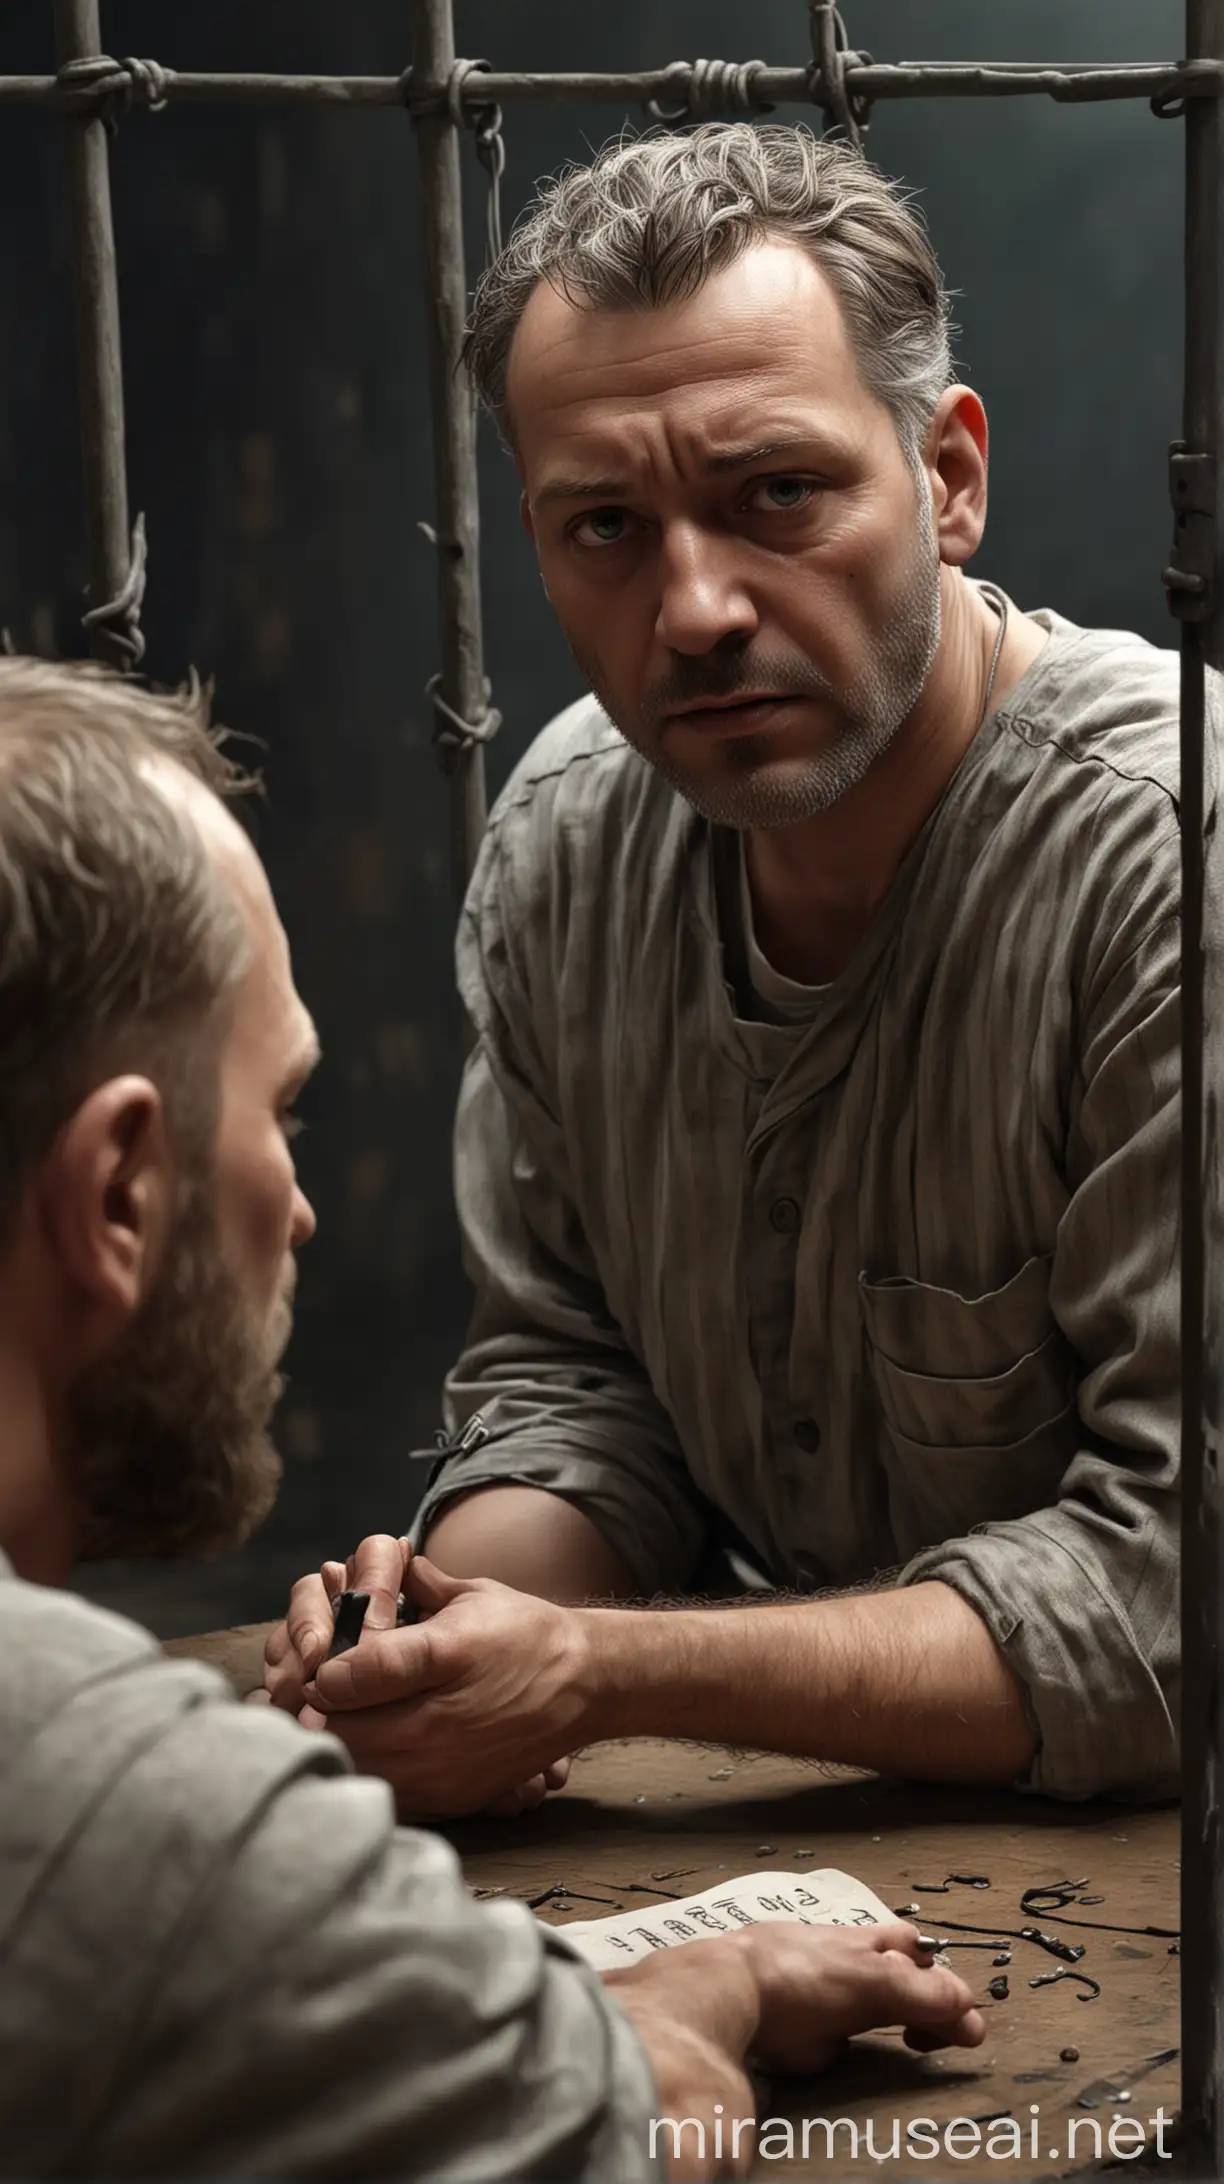 Scharf casually questioning a prisoner, with a look of confidence as he already knows the answers. hyper realistic